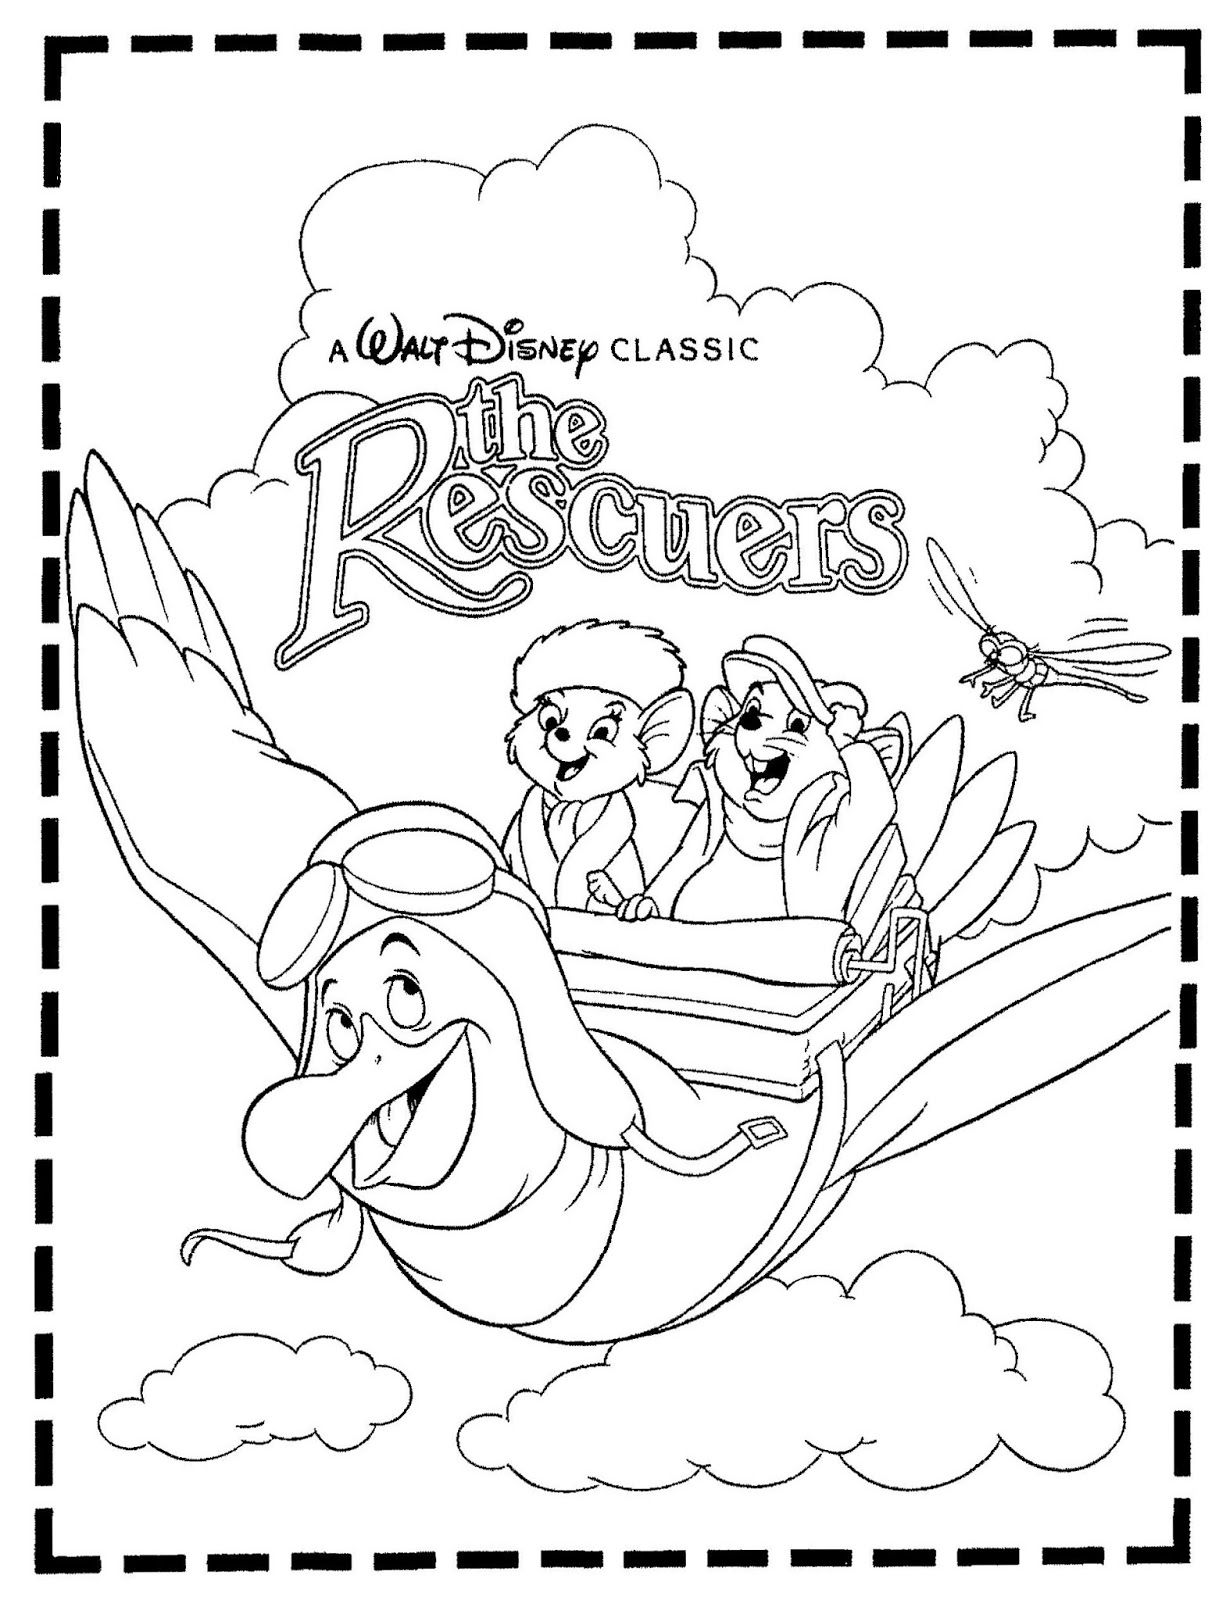 Mostly Paper Dolls Too!: THE RESCUERS Movie Coloring Contest